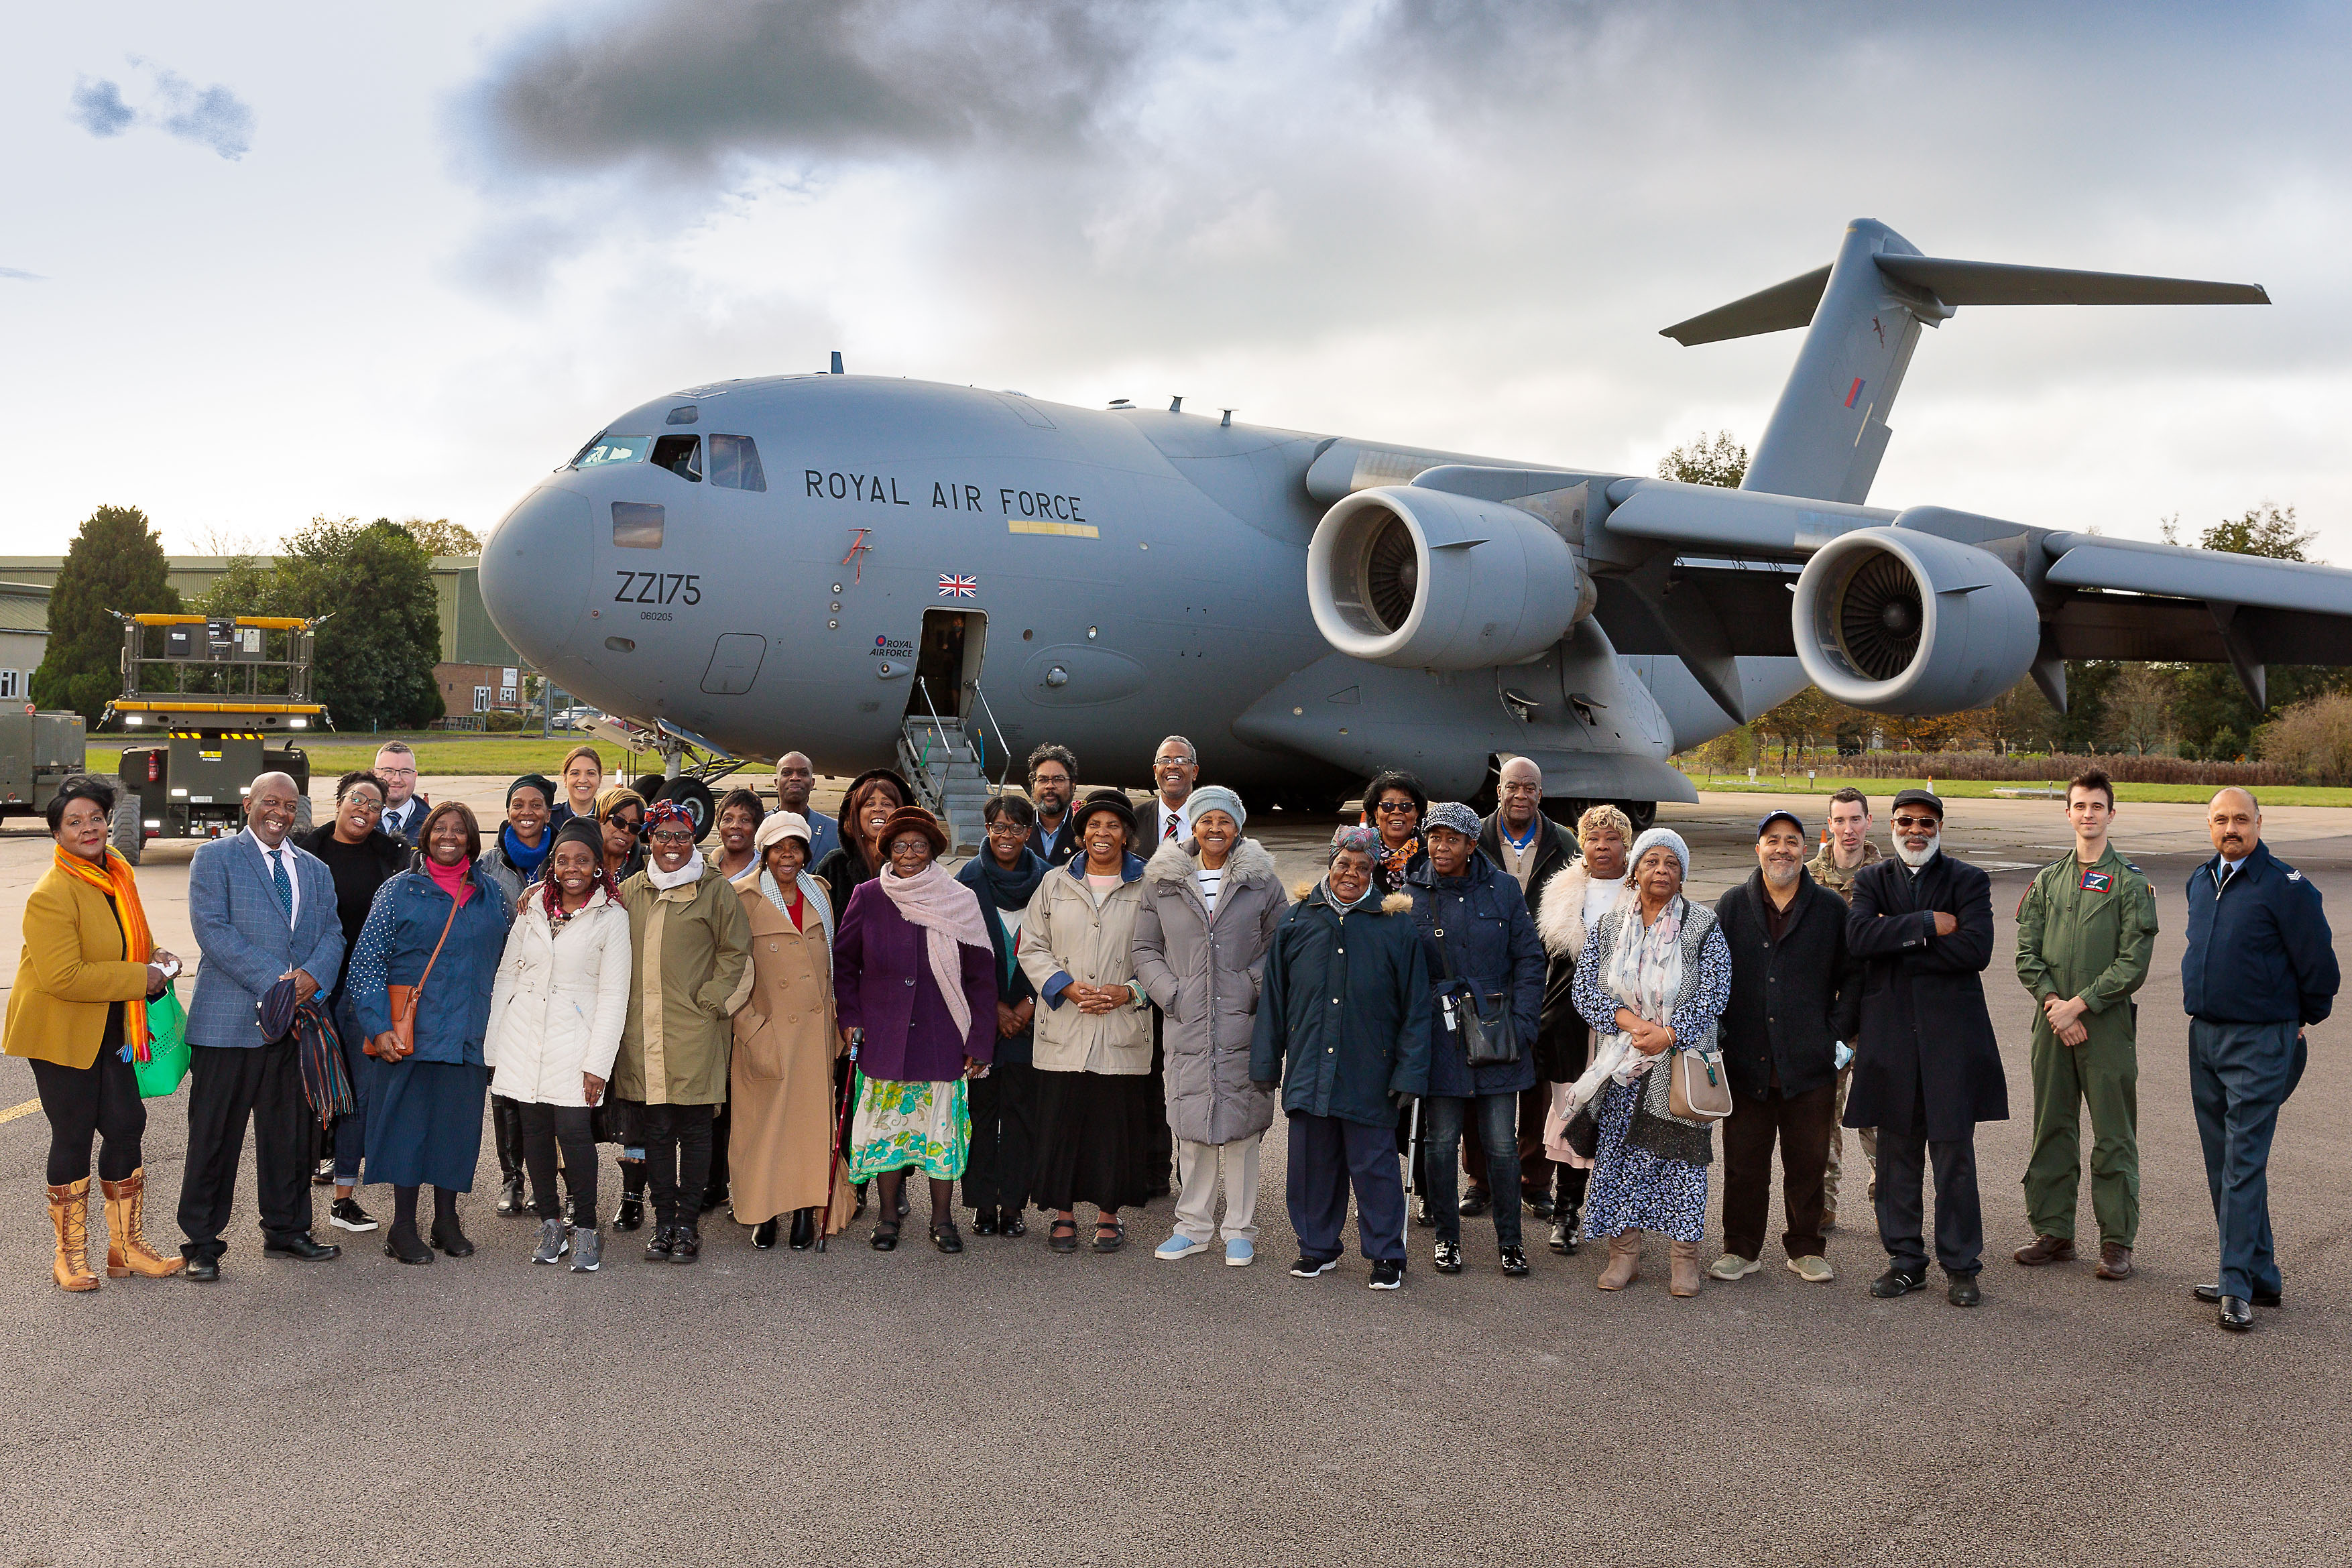 On 23rd November, Community and Religious Leaders from the Birmingham area visited RAF Brize Norton for a familiarisation event, highlighting the wide range of branches available to the young adults in their communities.